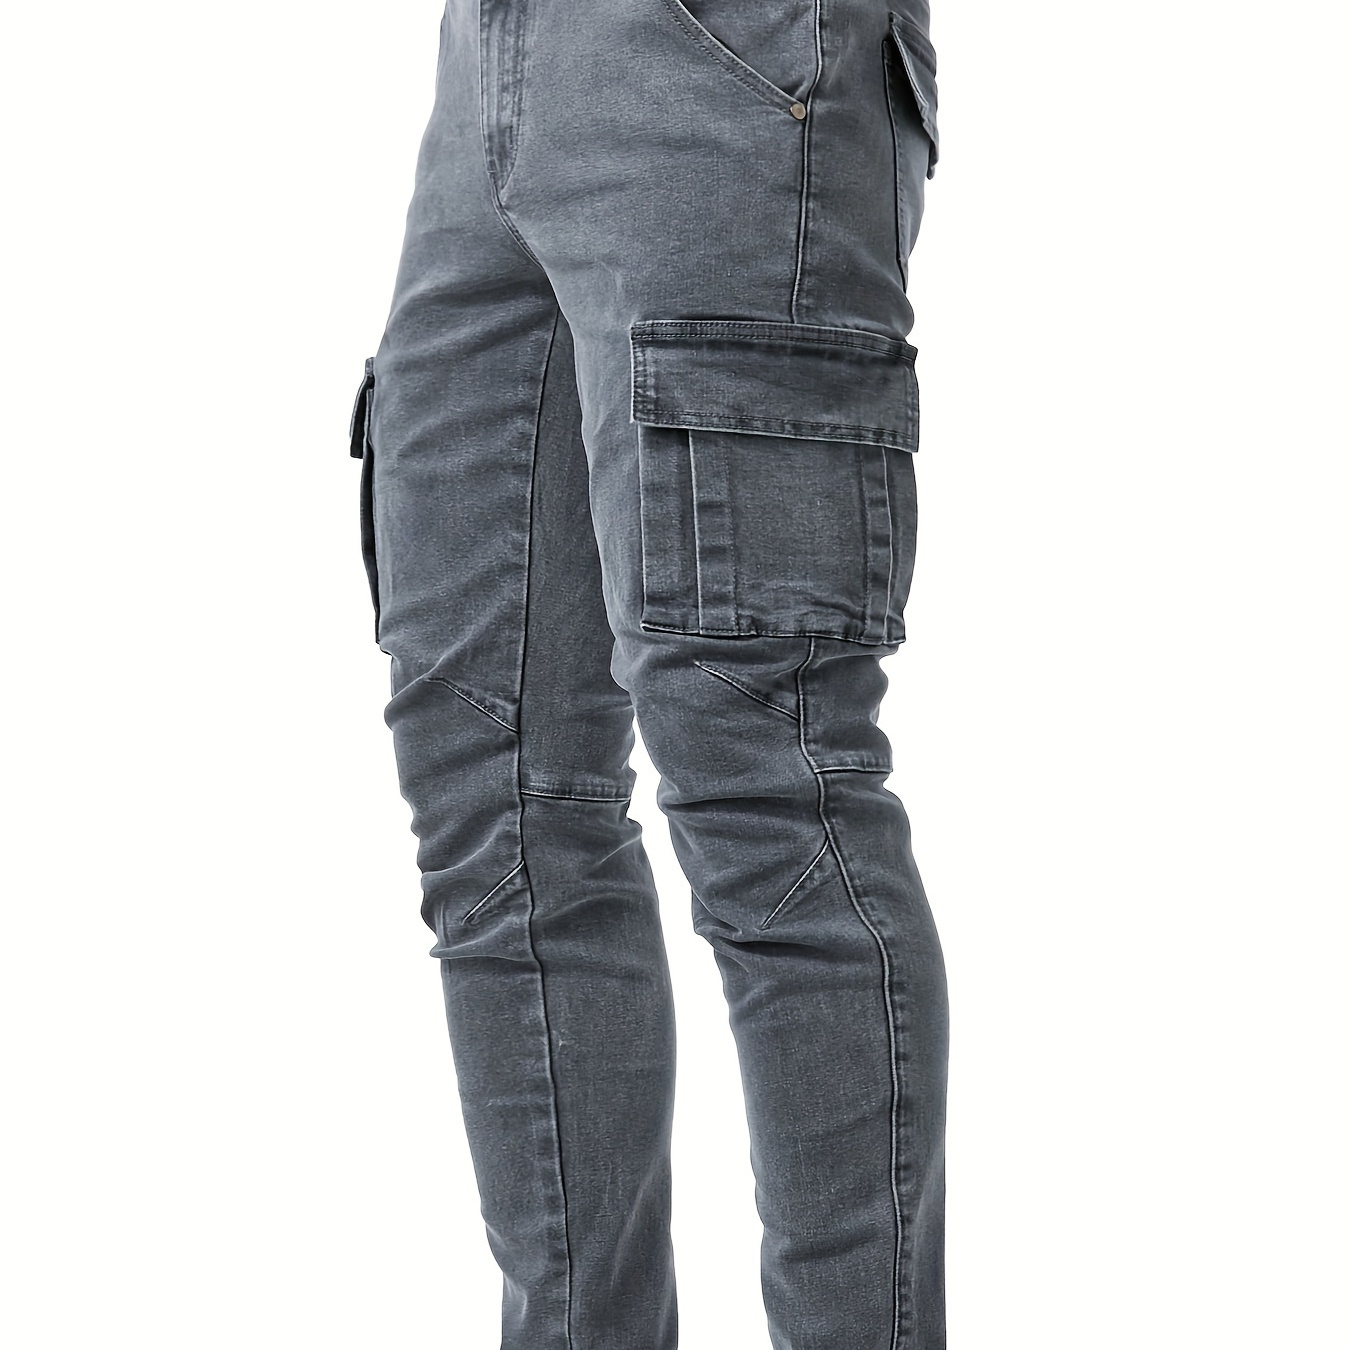 

Men's Casual Multi Pocket Jeans, Chic Street Style High Stretch Cargo Denim Pants